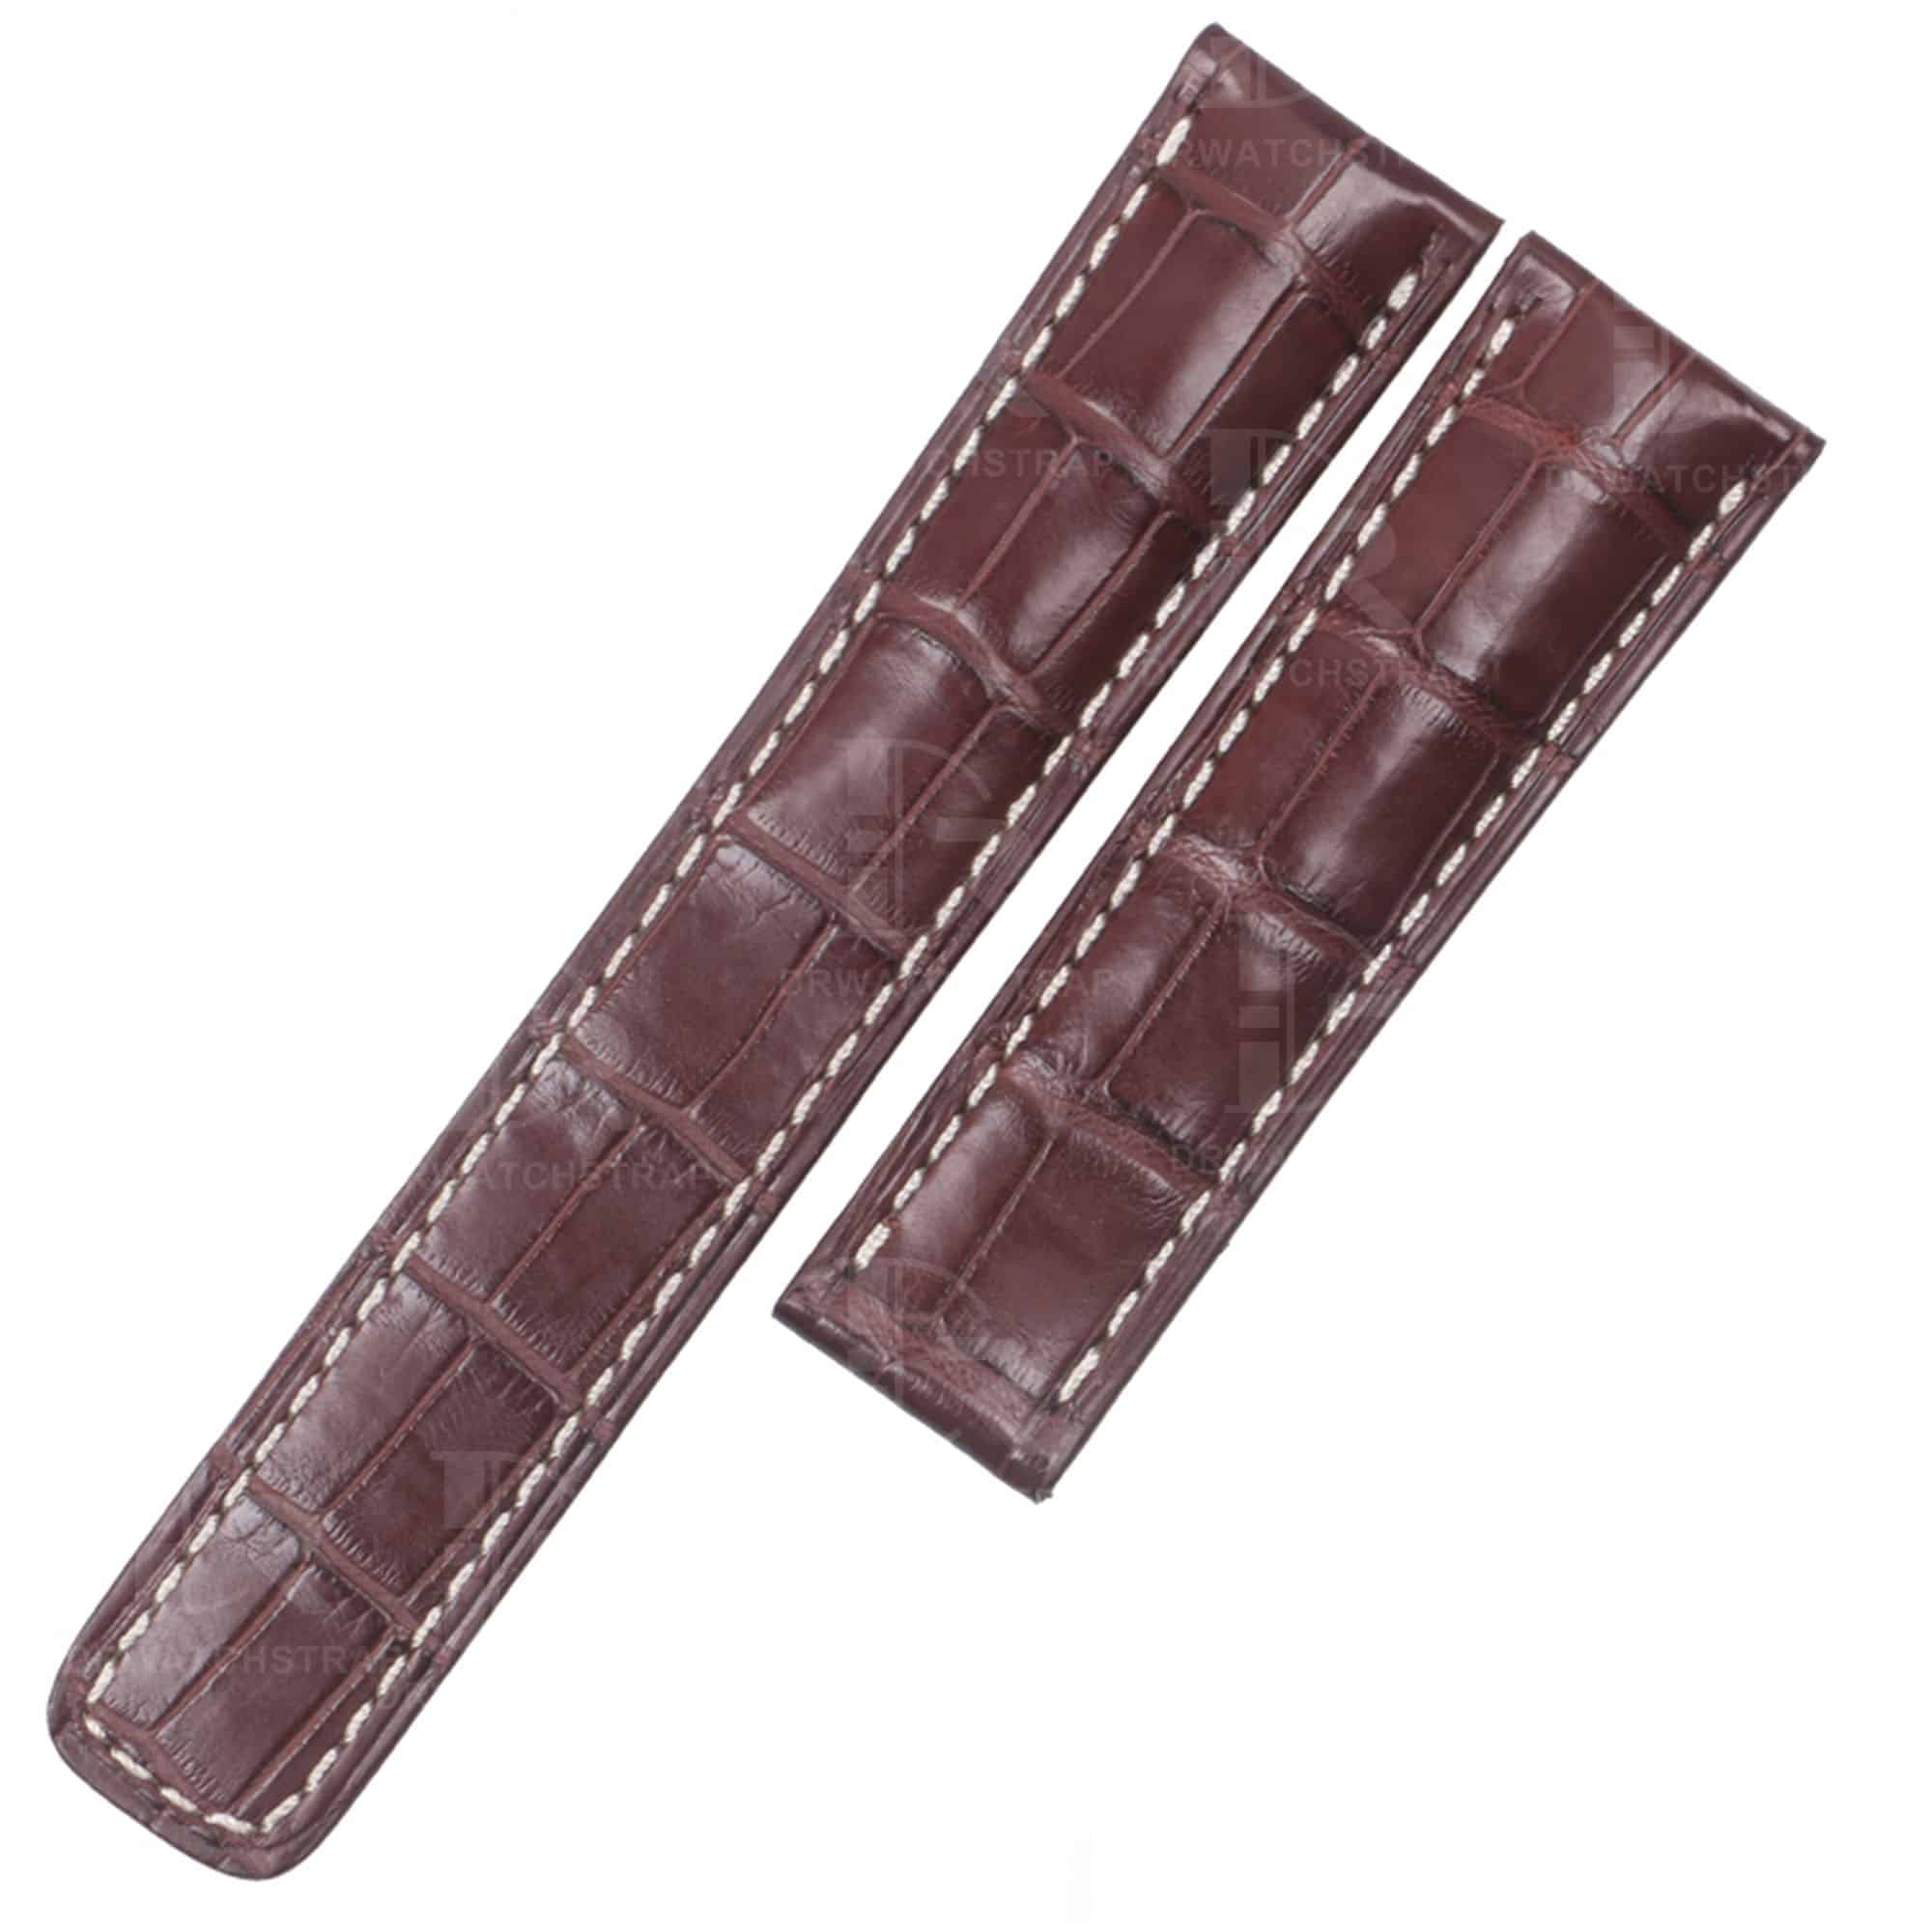 Custom handmade replacement leather alligator watch bands for Carl f Bucherer strap